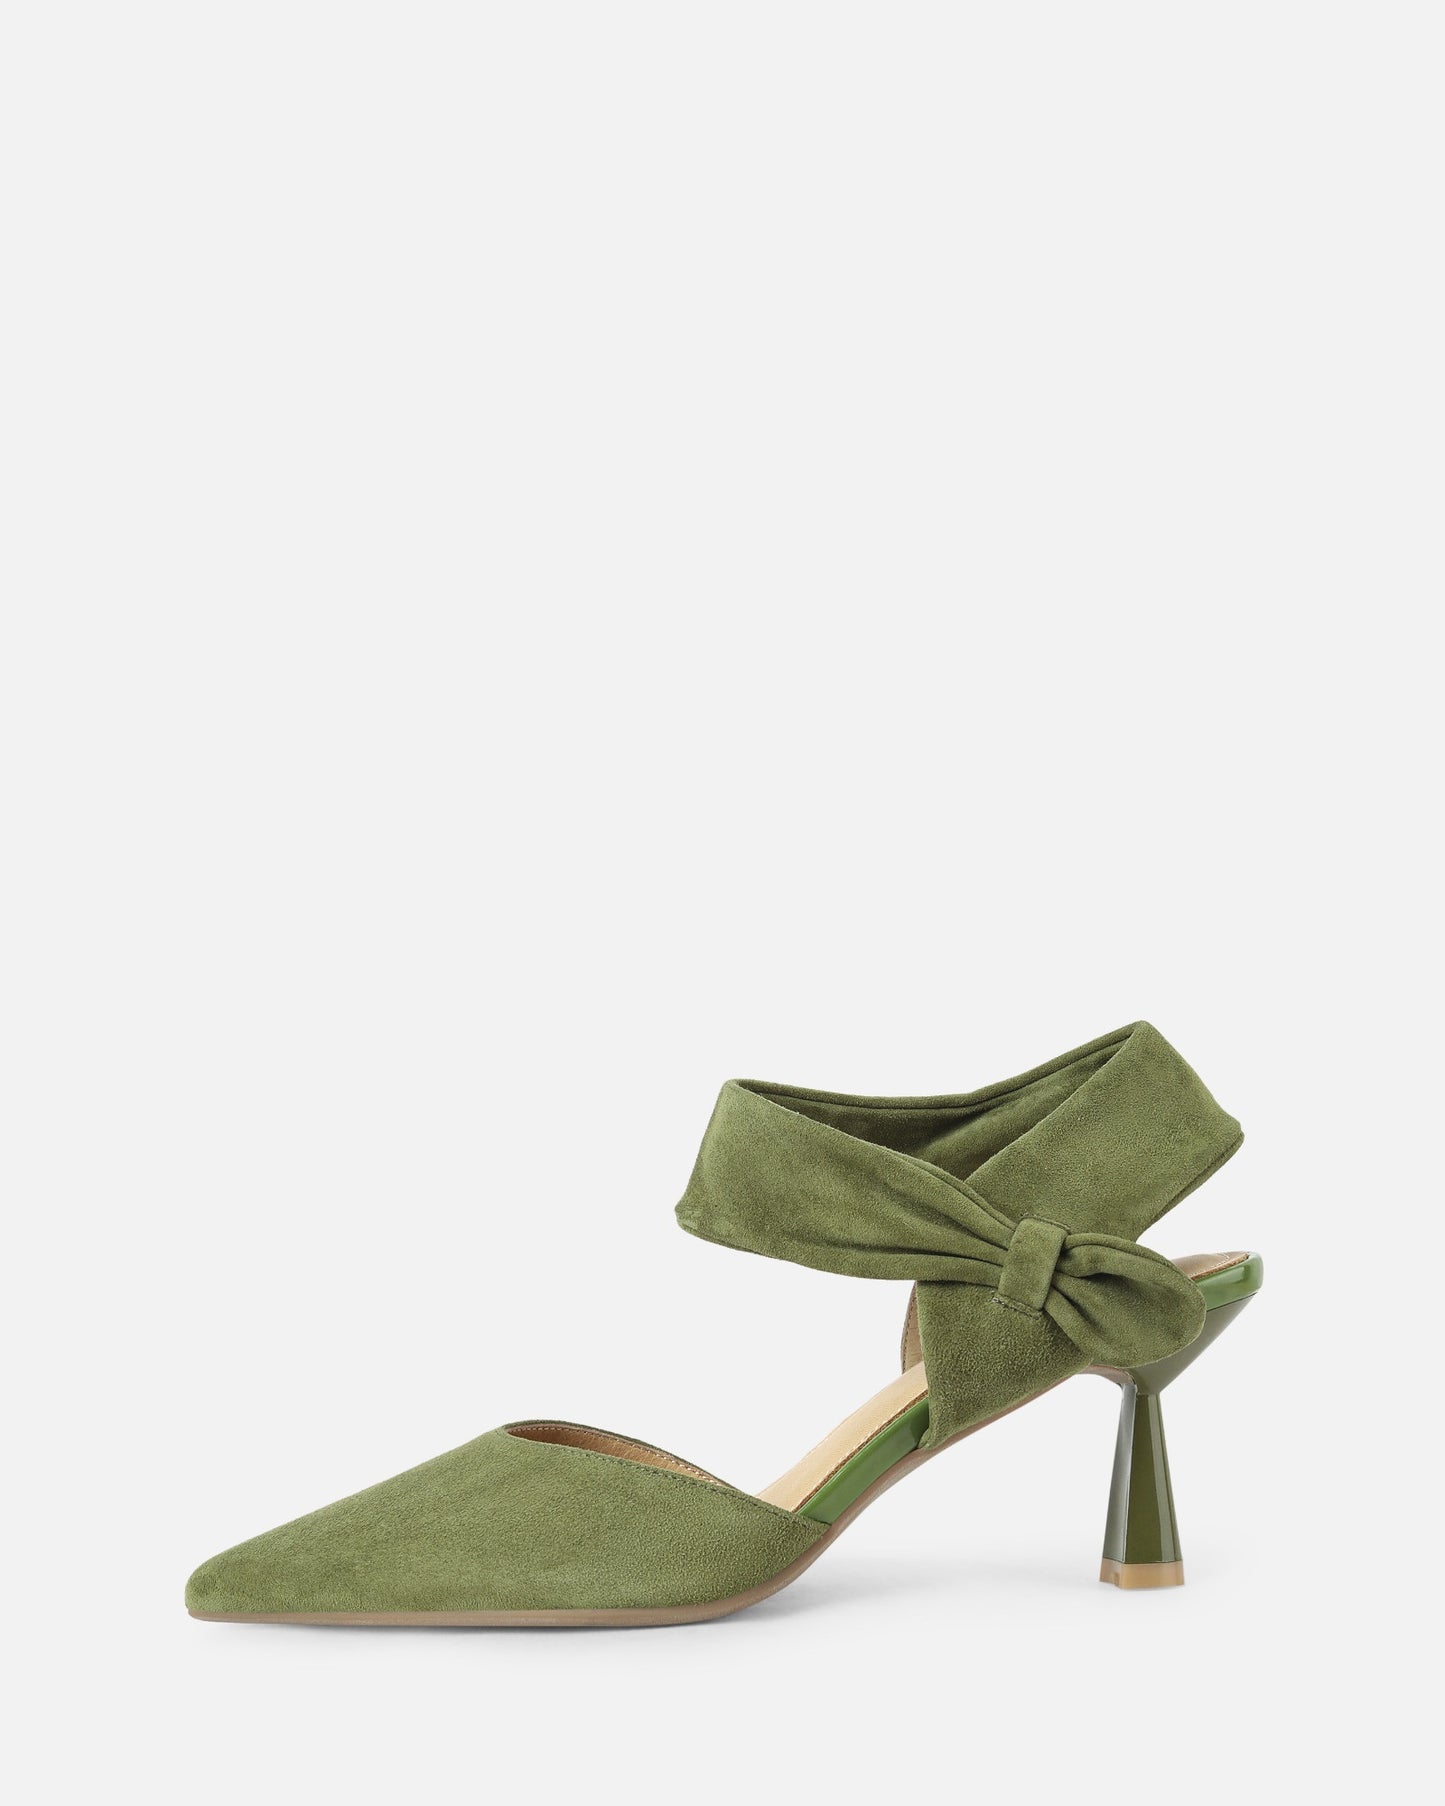 Kaia-ankle-strap-green-suede-heels